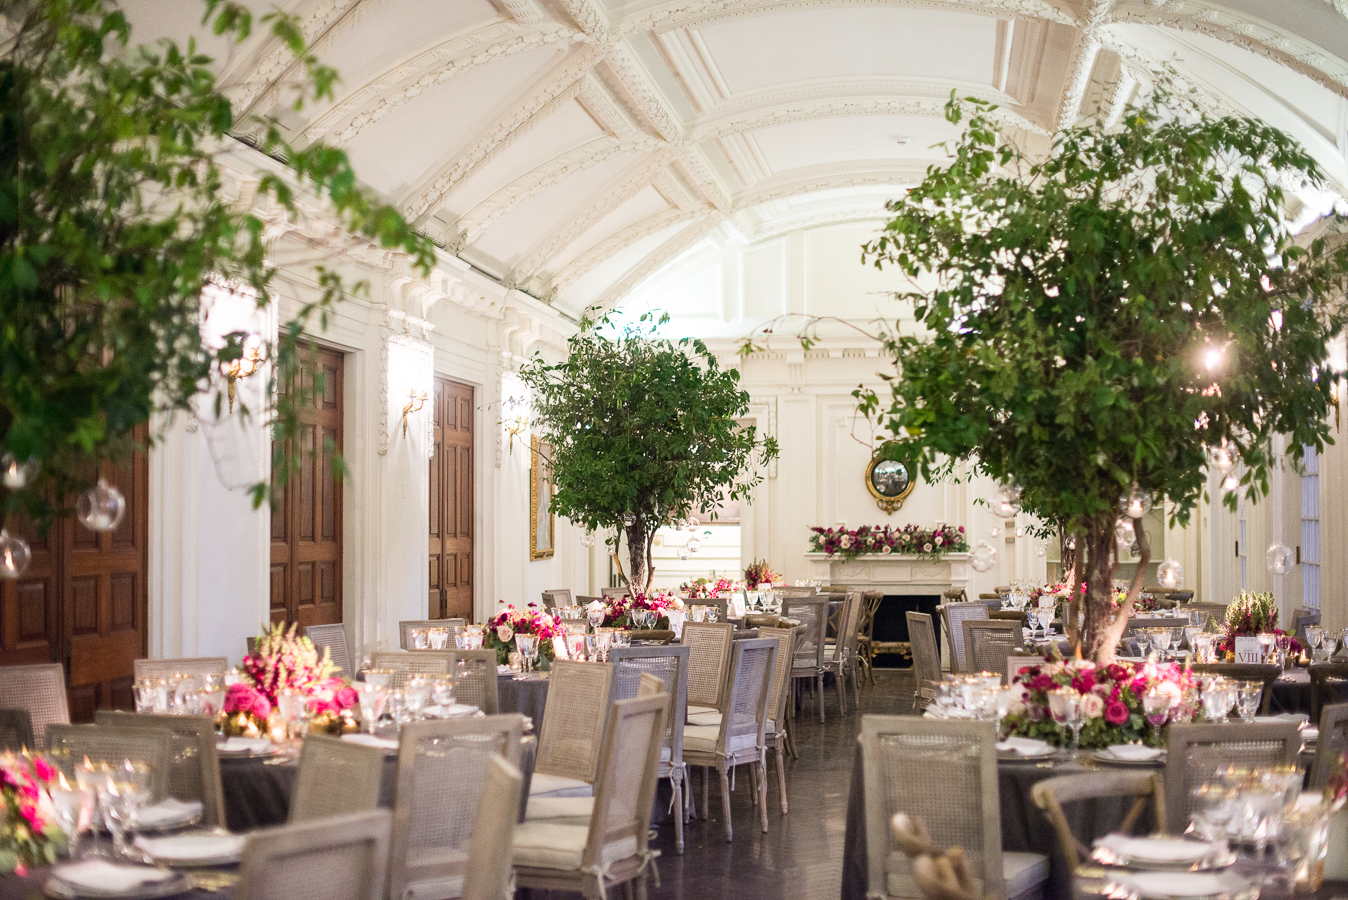 Berry Toned Flowers and Trees Wedding Reception at DAR in Washington, DC